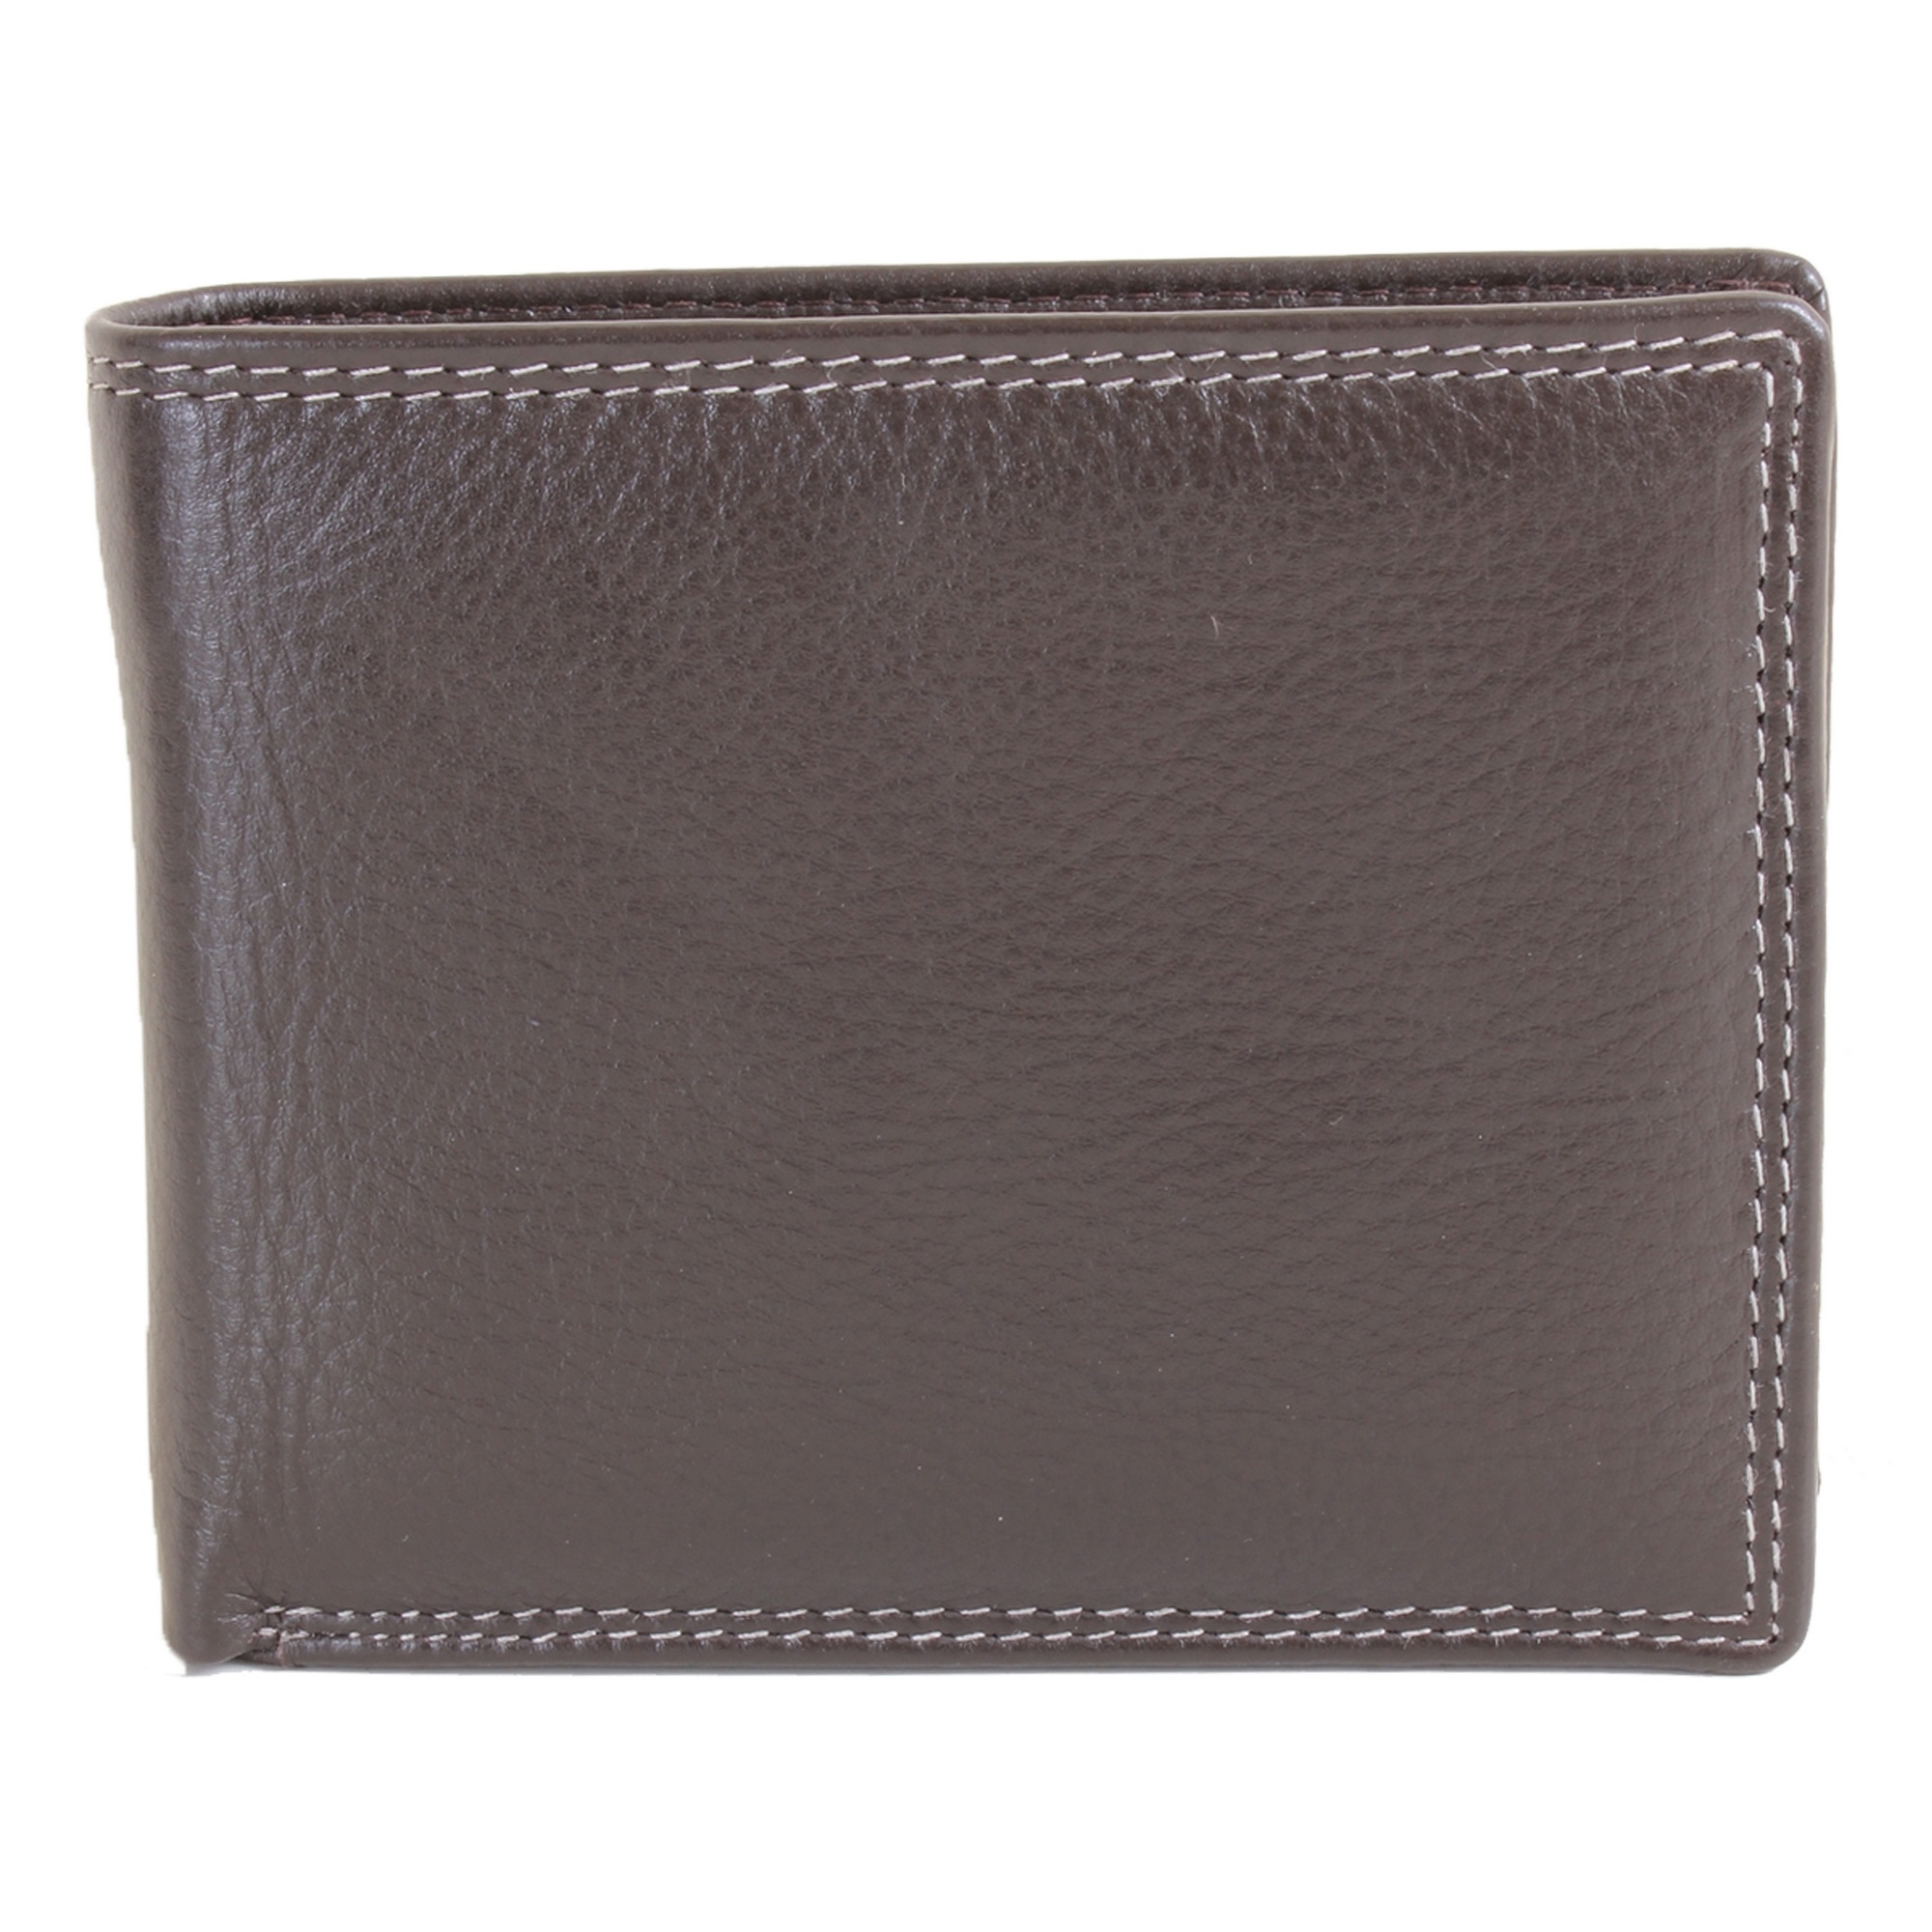 Wallet - Brown Leather Luxury with Coin Pocket, RFID - TBM and Friends